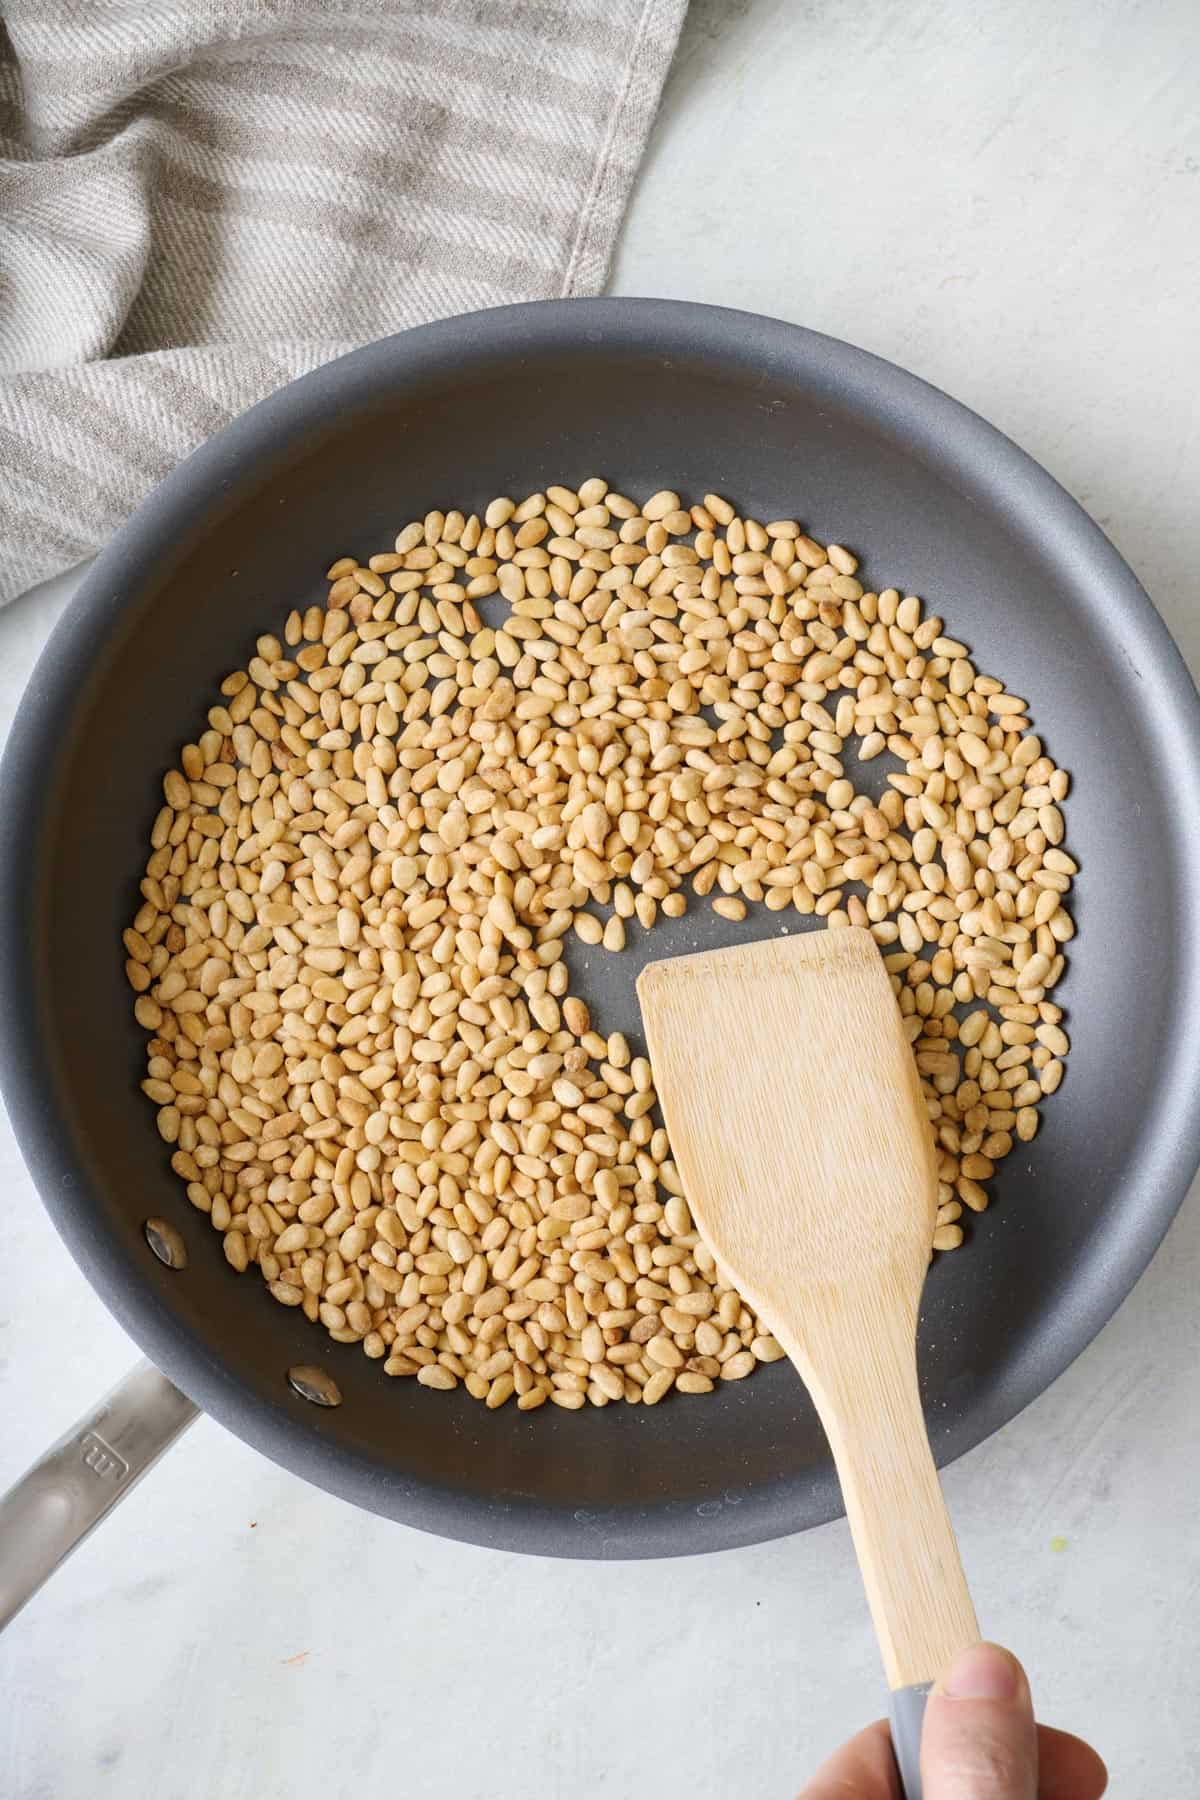 Toasted pine nuts in a small skillet with a wooden spatula pushing them around.